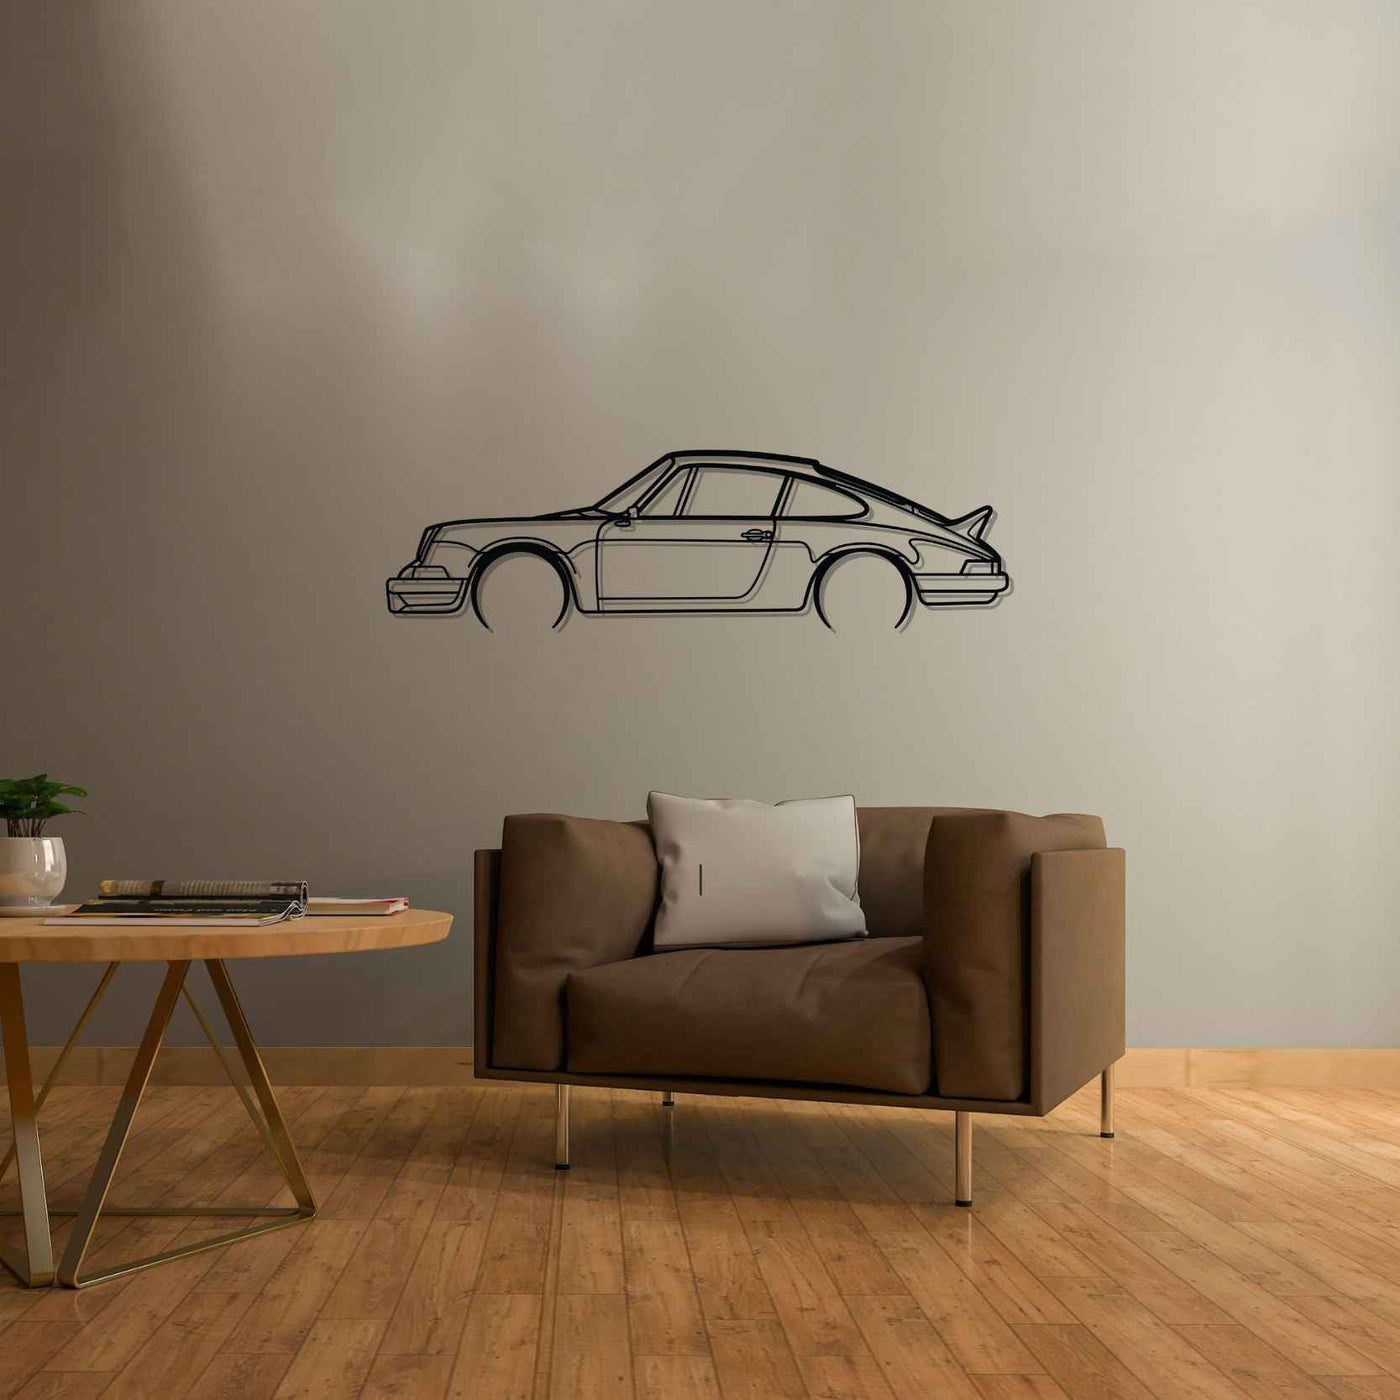 911 RS 1973 Detailed Silhouette Metal Wall Art